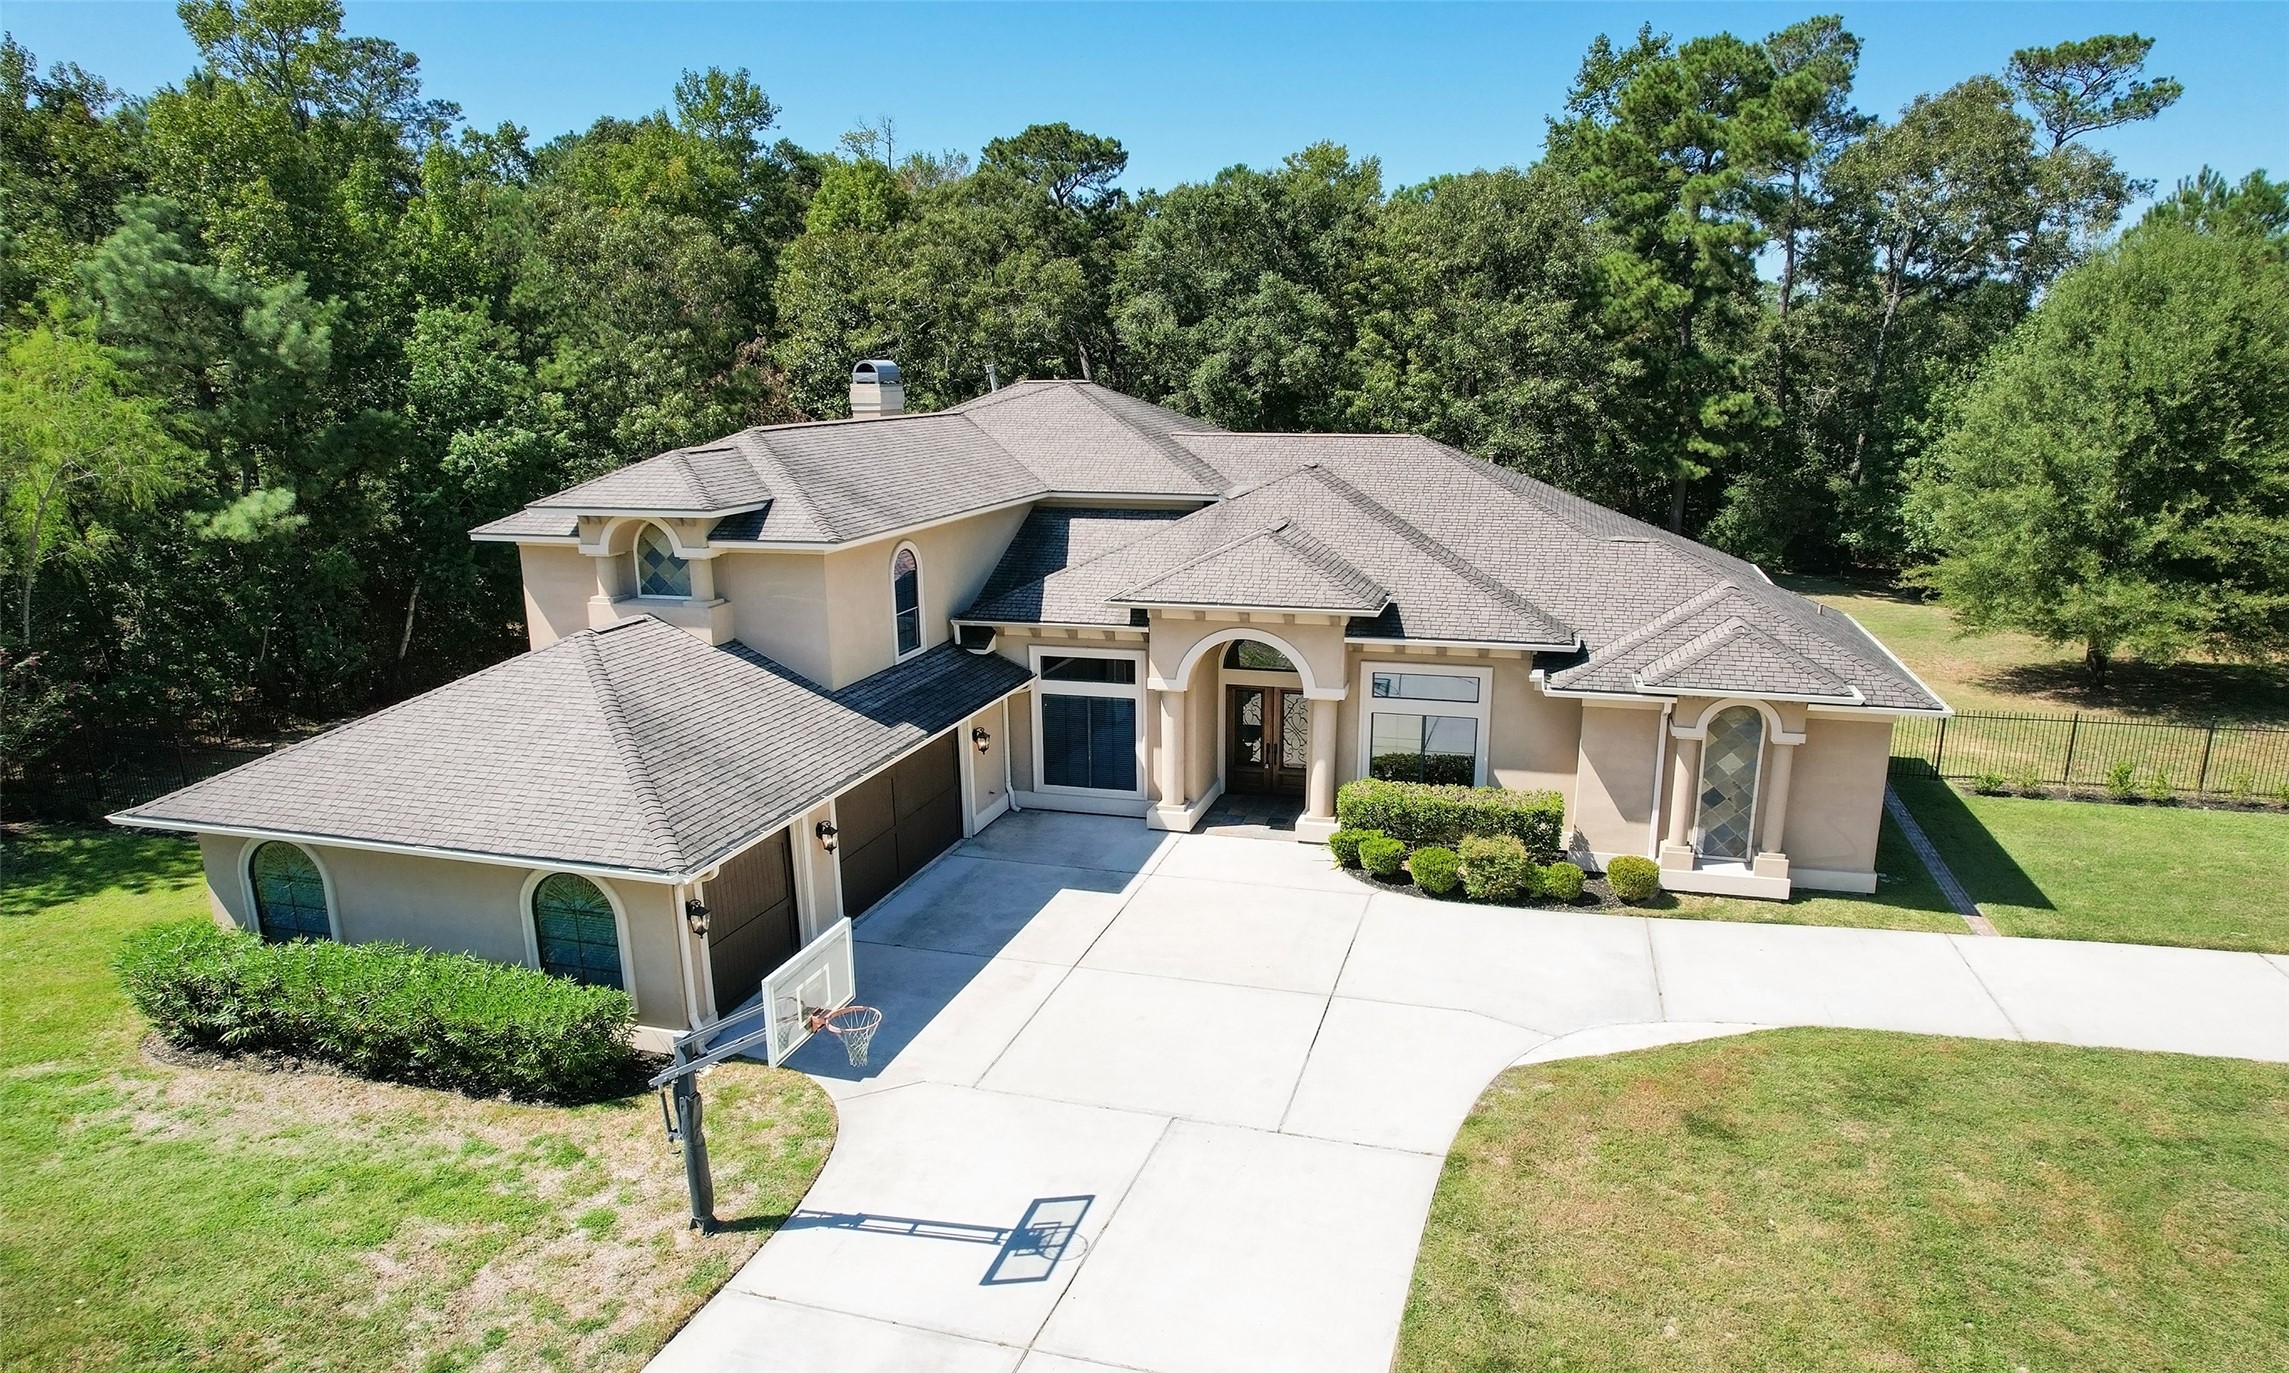 Sprawling home sits on a one acre lot with circle drive in the front